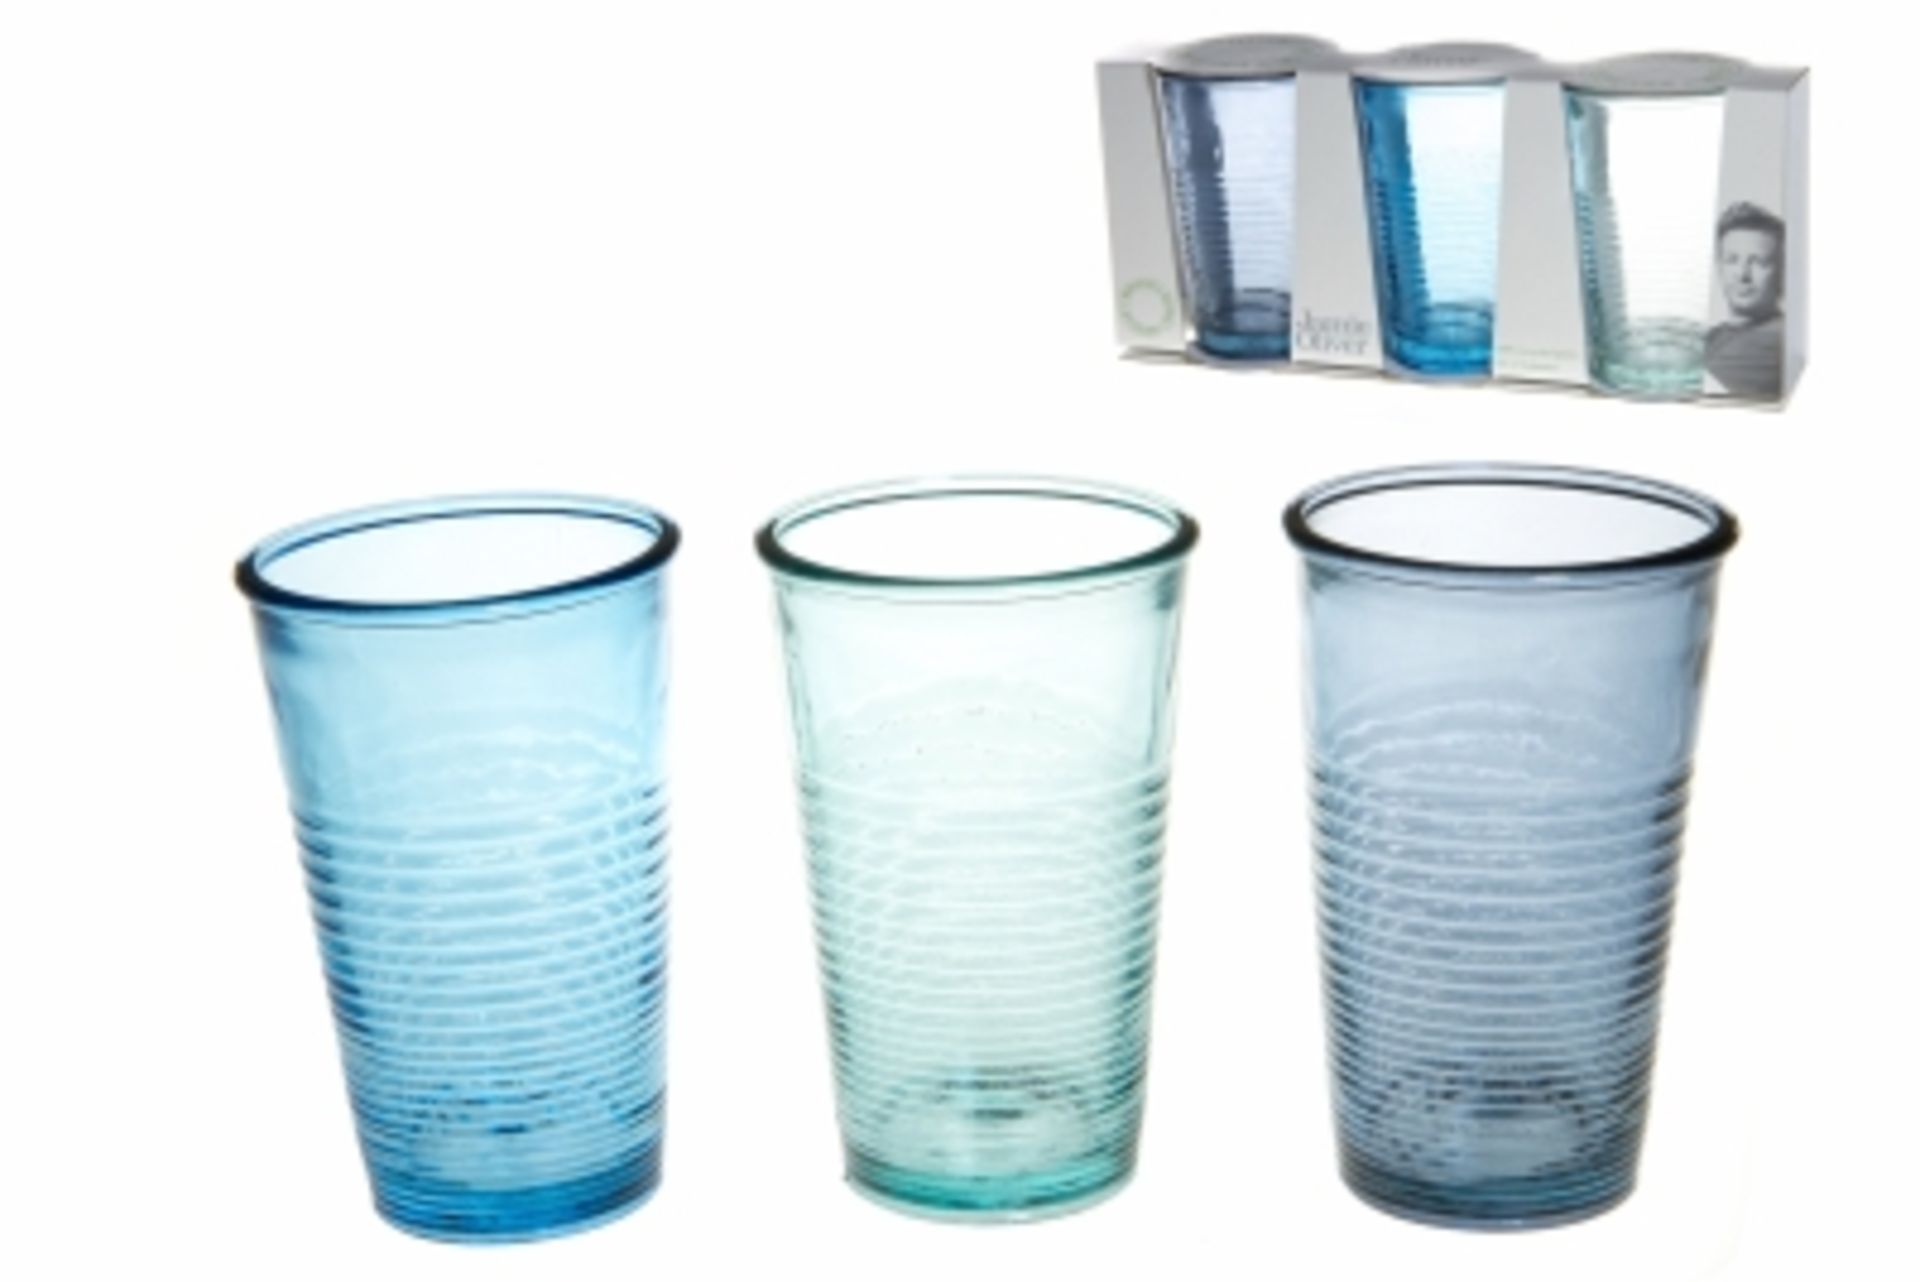 V Brand New Jamie Oliver Set Of Three Glasses Made From 100% Recycled Glass